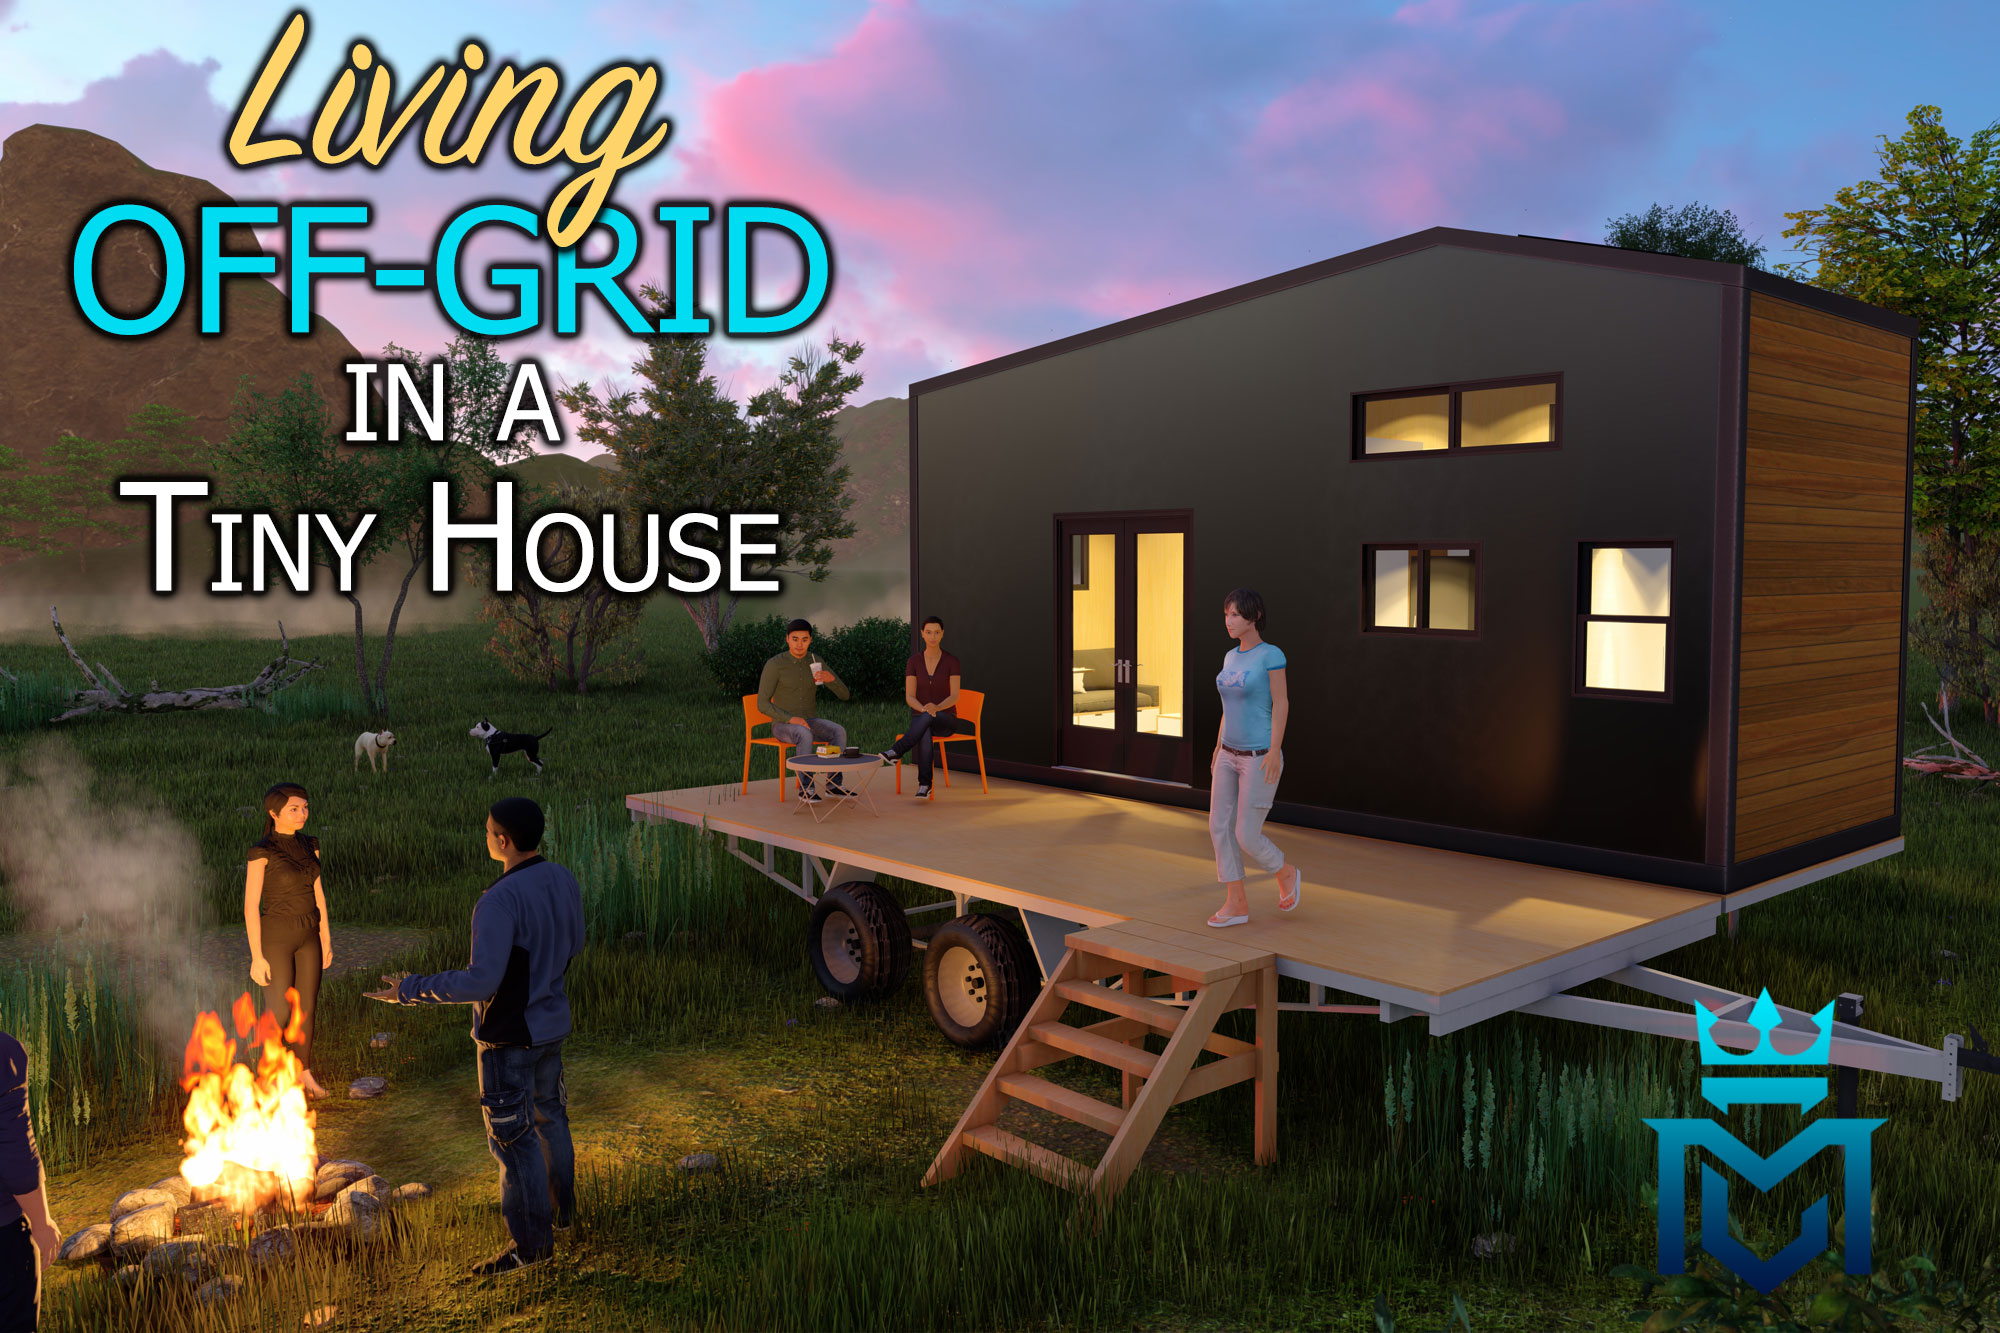 Off-Grid-Living-in-a-Tiny-House-1.jpg